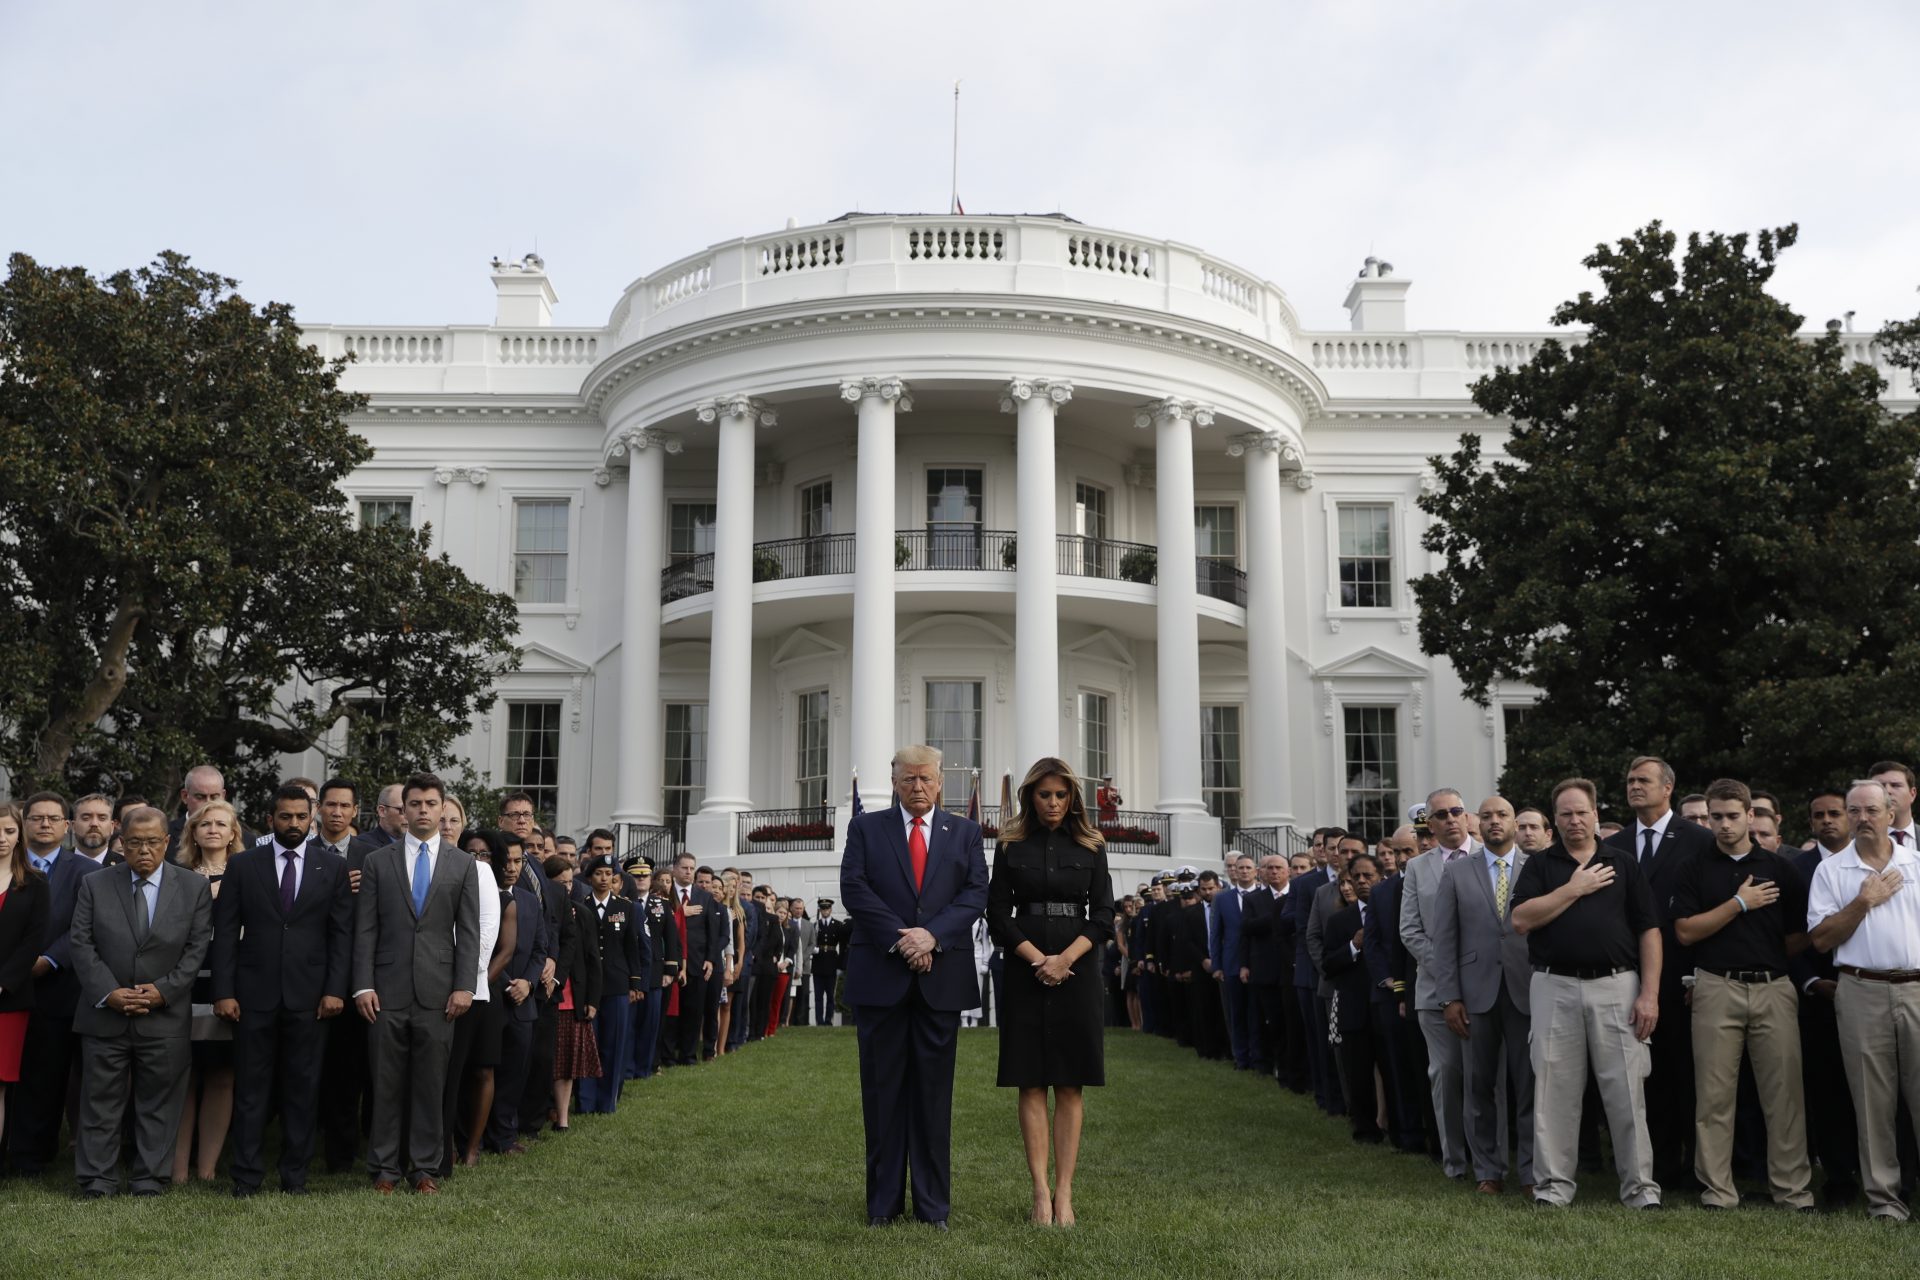 President Donald Trump and first lady Melania Trump participate in a moment of silence honoring the victims of the Sept. 11 terrorist attacks, on the South Lawn of the White House, Wednesday, Sept. 11, 2019, in Washington.